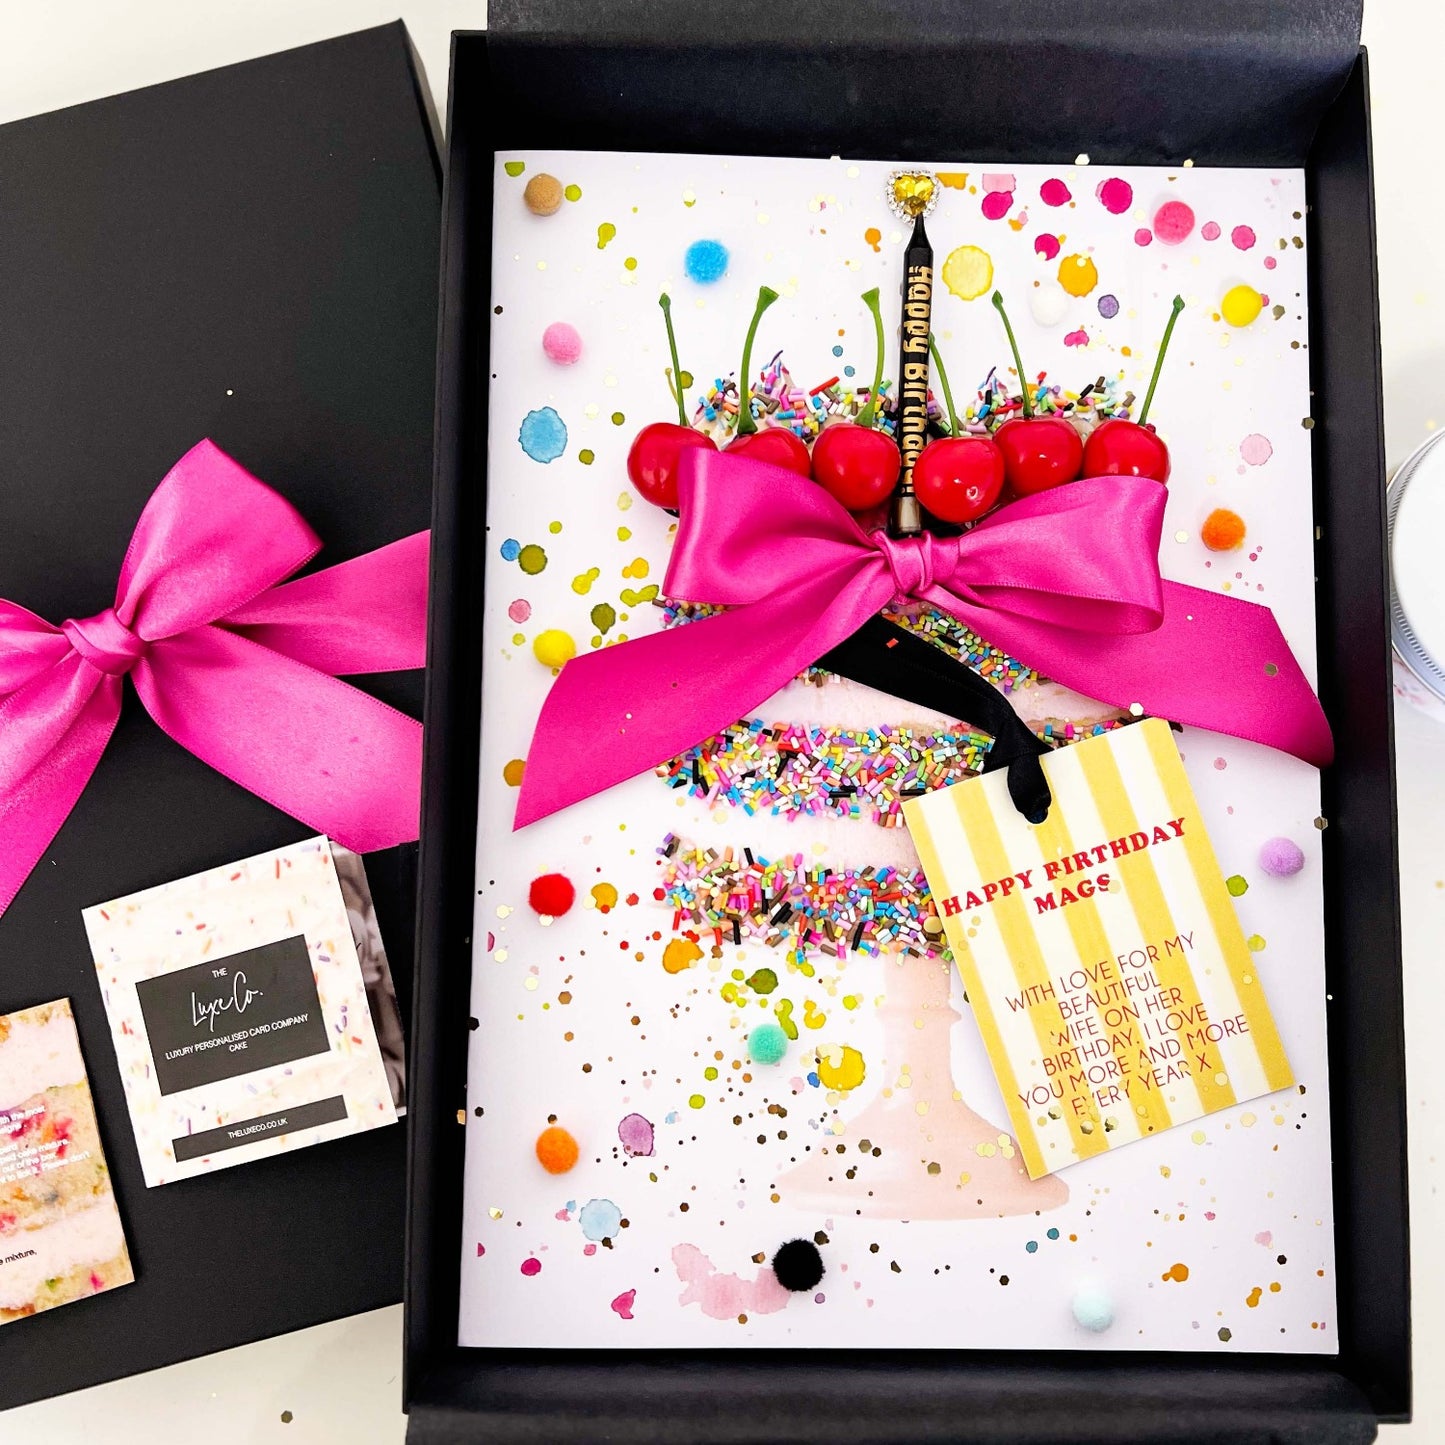 Luxury cake birthday card | Scented birthday cake cards by The Luxe Co